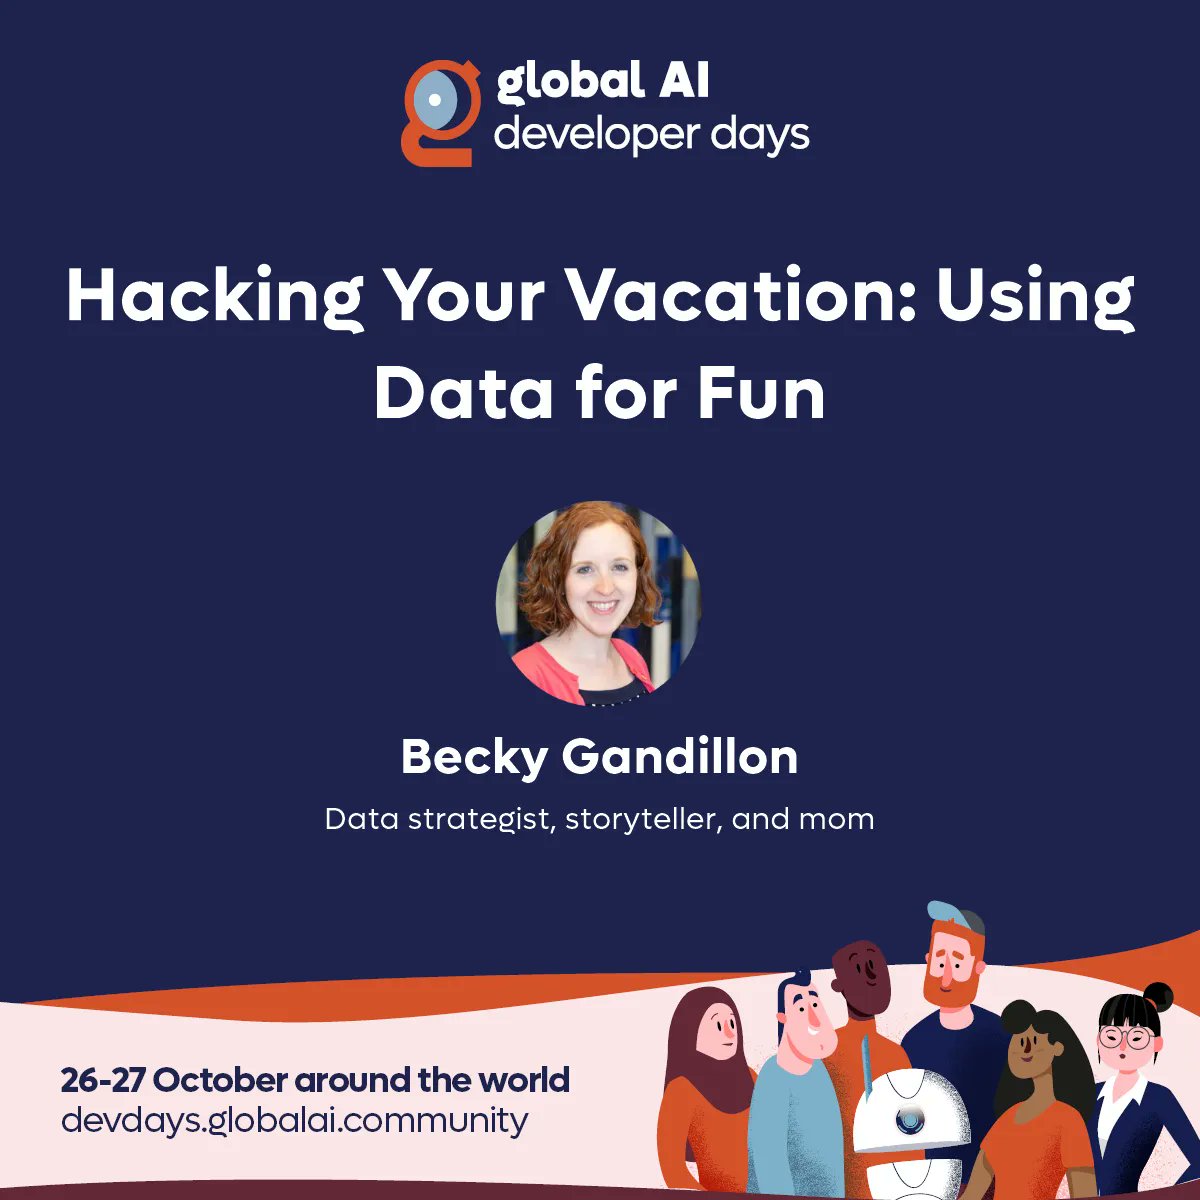 Join the #GlobalAIDeveloperDays this October for the #Hybrid #AI #Community event of the year! 📅 27 October | 18:00 UTC 🤩 Becky Gandillon () 📢 Hacking Your Vacation: Using Data for Fun Register now on: buff.ly/3Sm5cgG